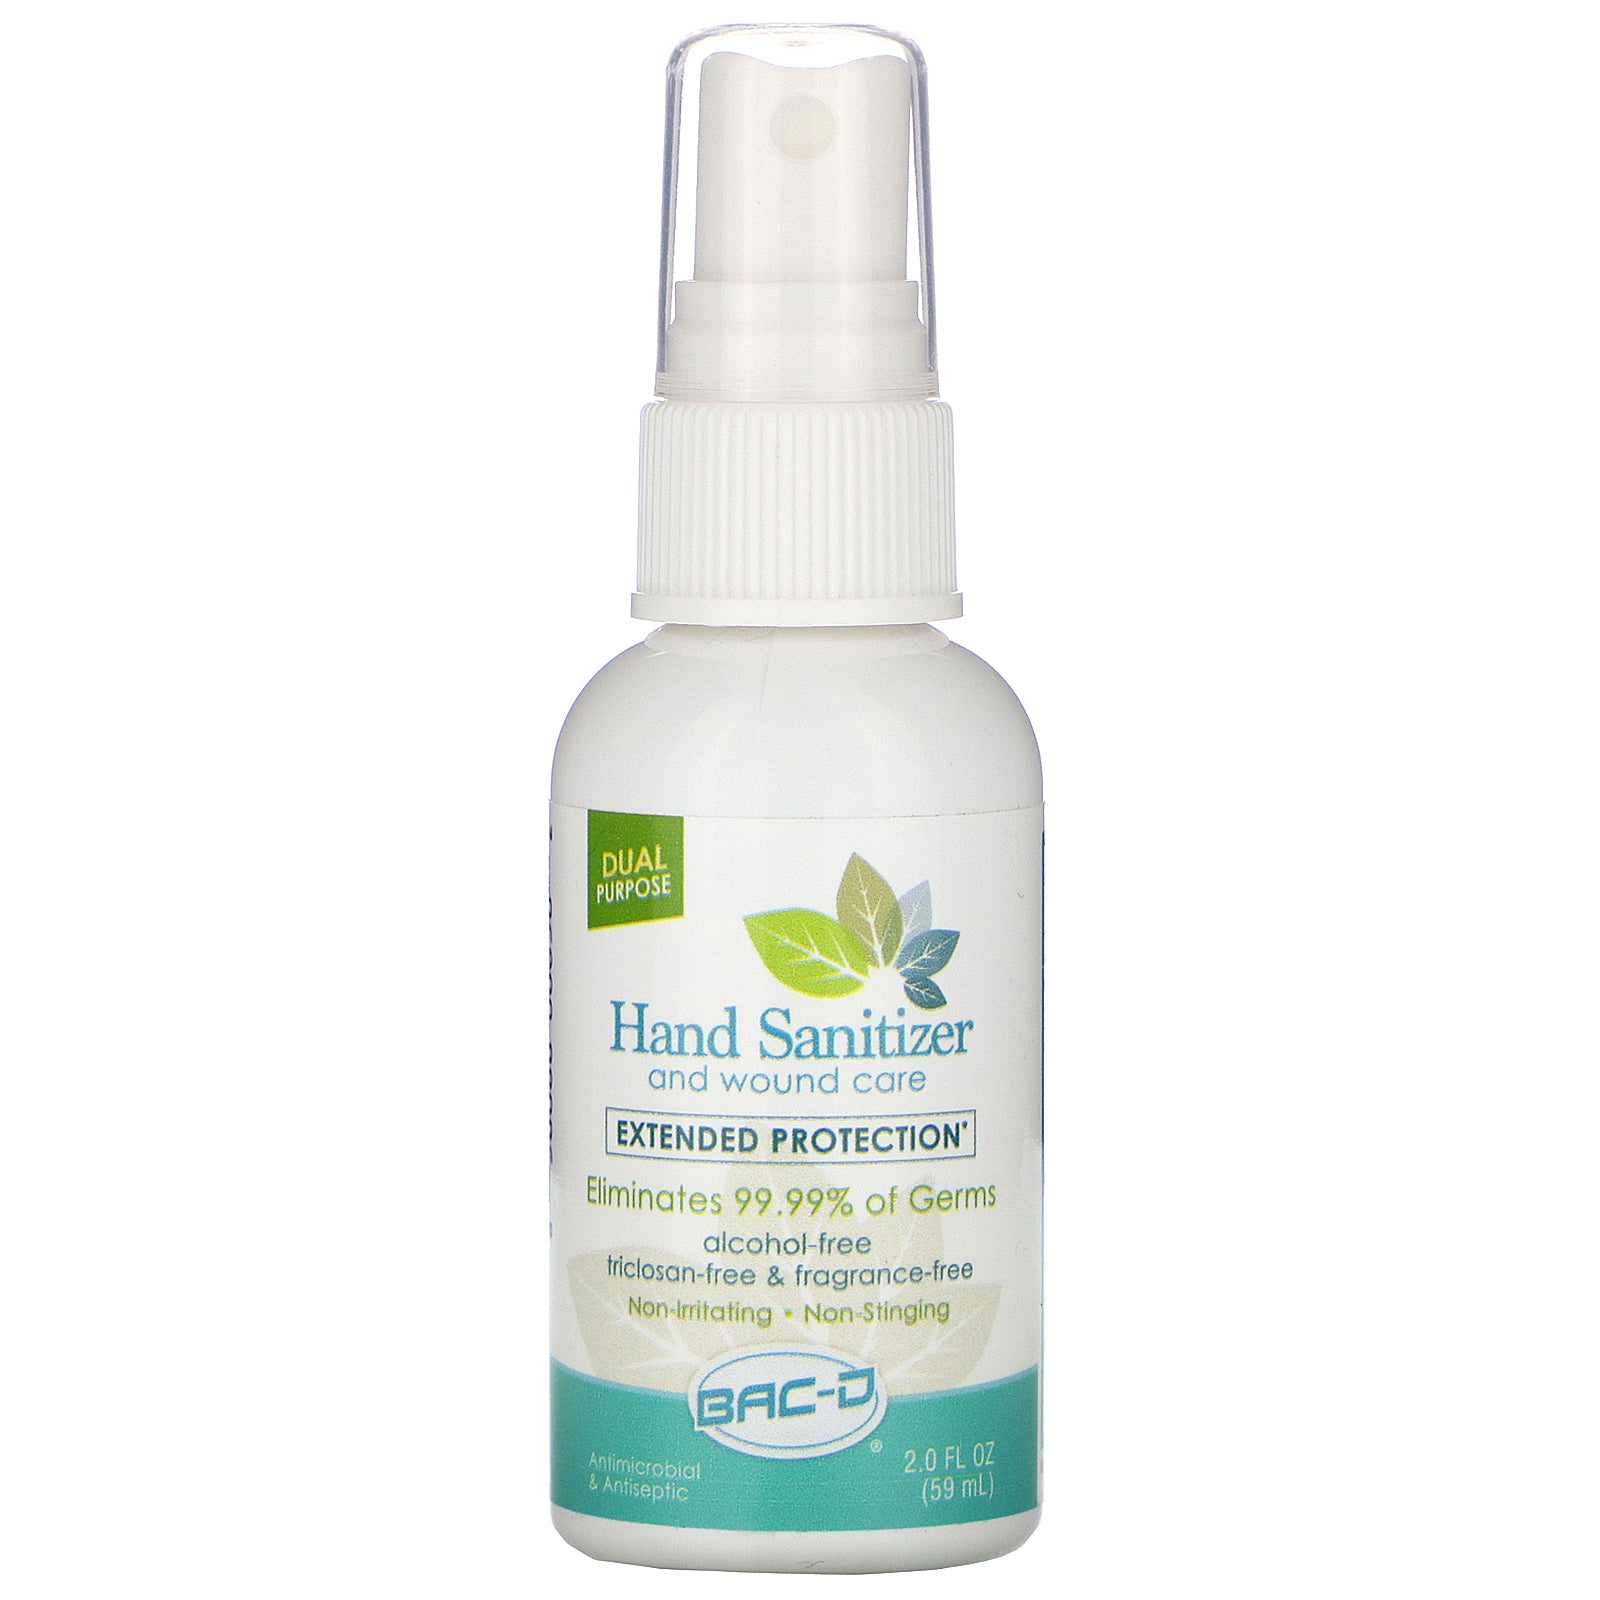 BAC-D, Hand Sanitizer and Wound Care, Alcohol Free, 2 fl oz (59 ml)